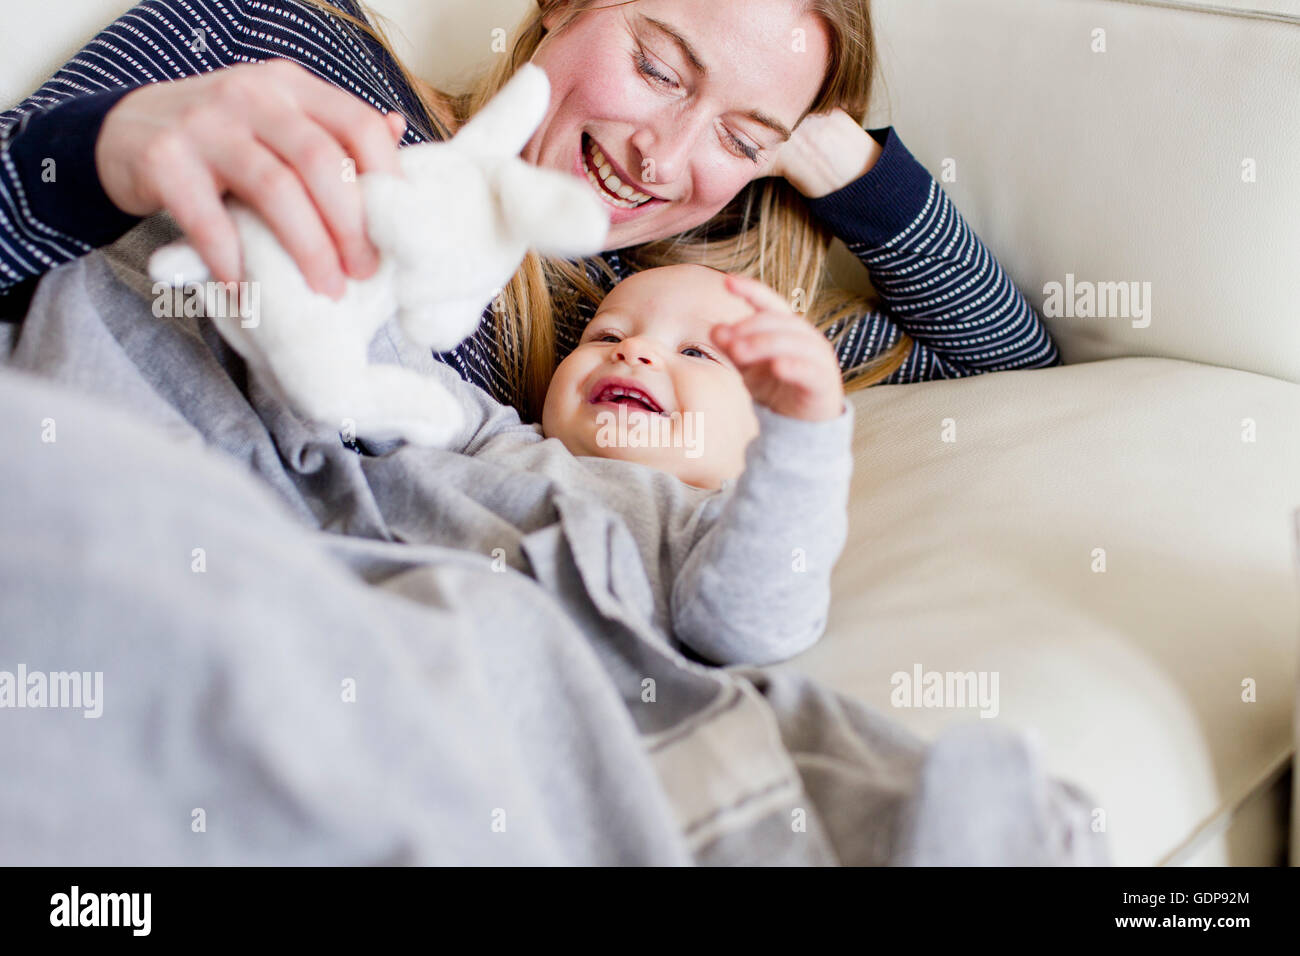 Baby girl and mother playing with toy rabbit on sofa Stock Photo